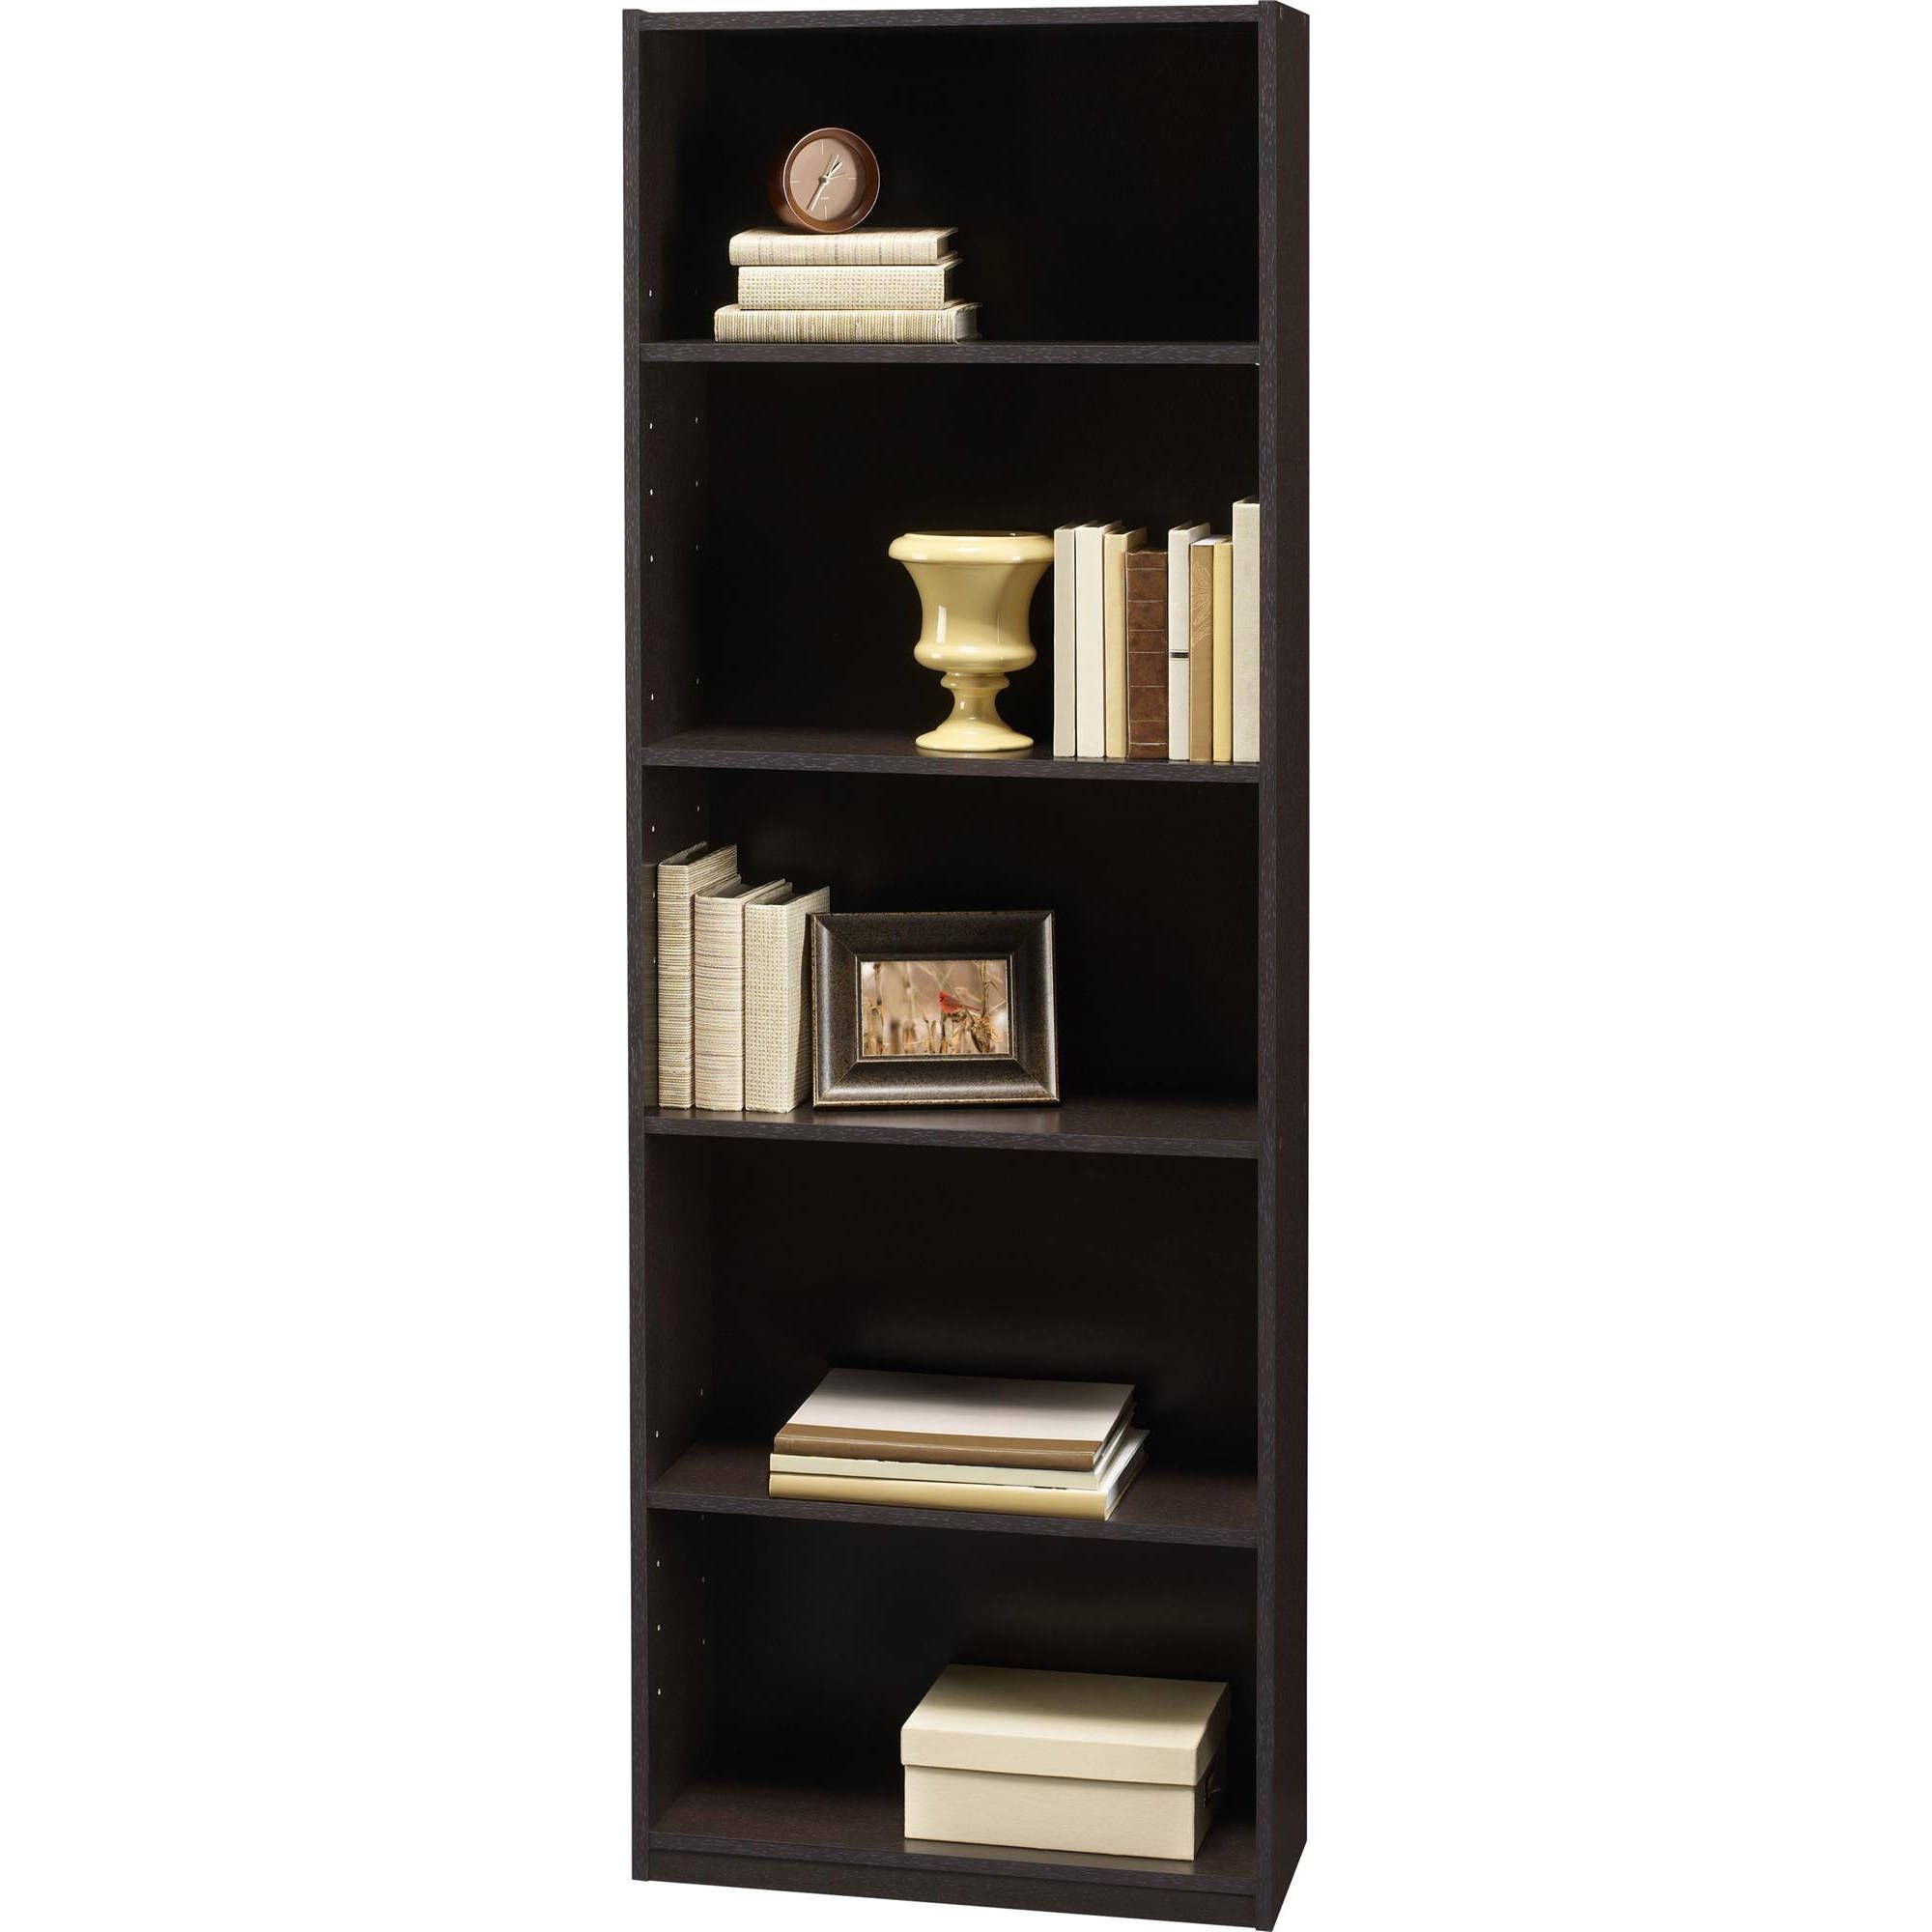 Walmart White Bookcases With Regard To 2018 Ameriwood 3 Shelf And 5 Shelf Bookcases (mix And Match) – Walmart (View 14 of 15)